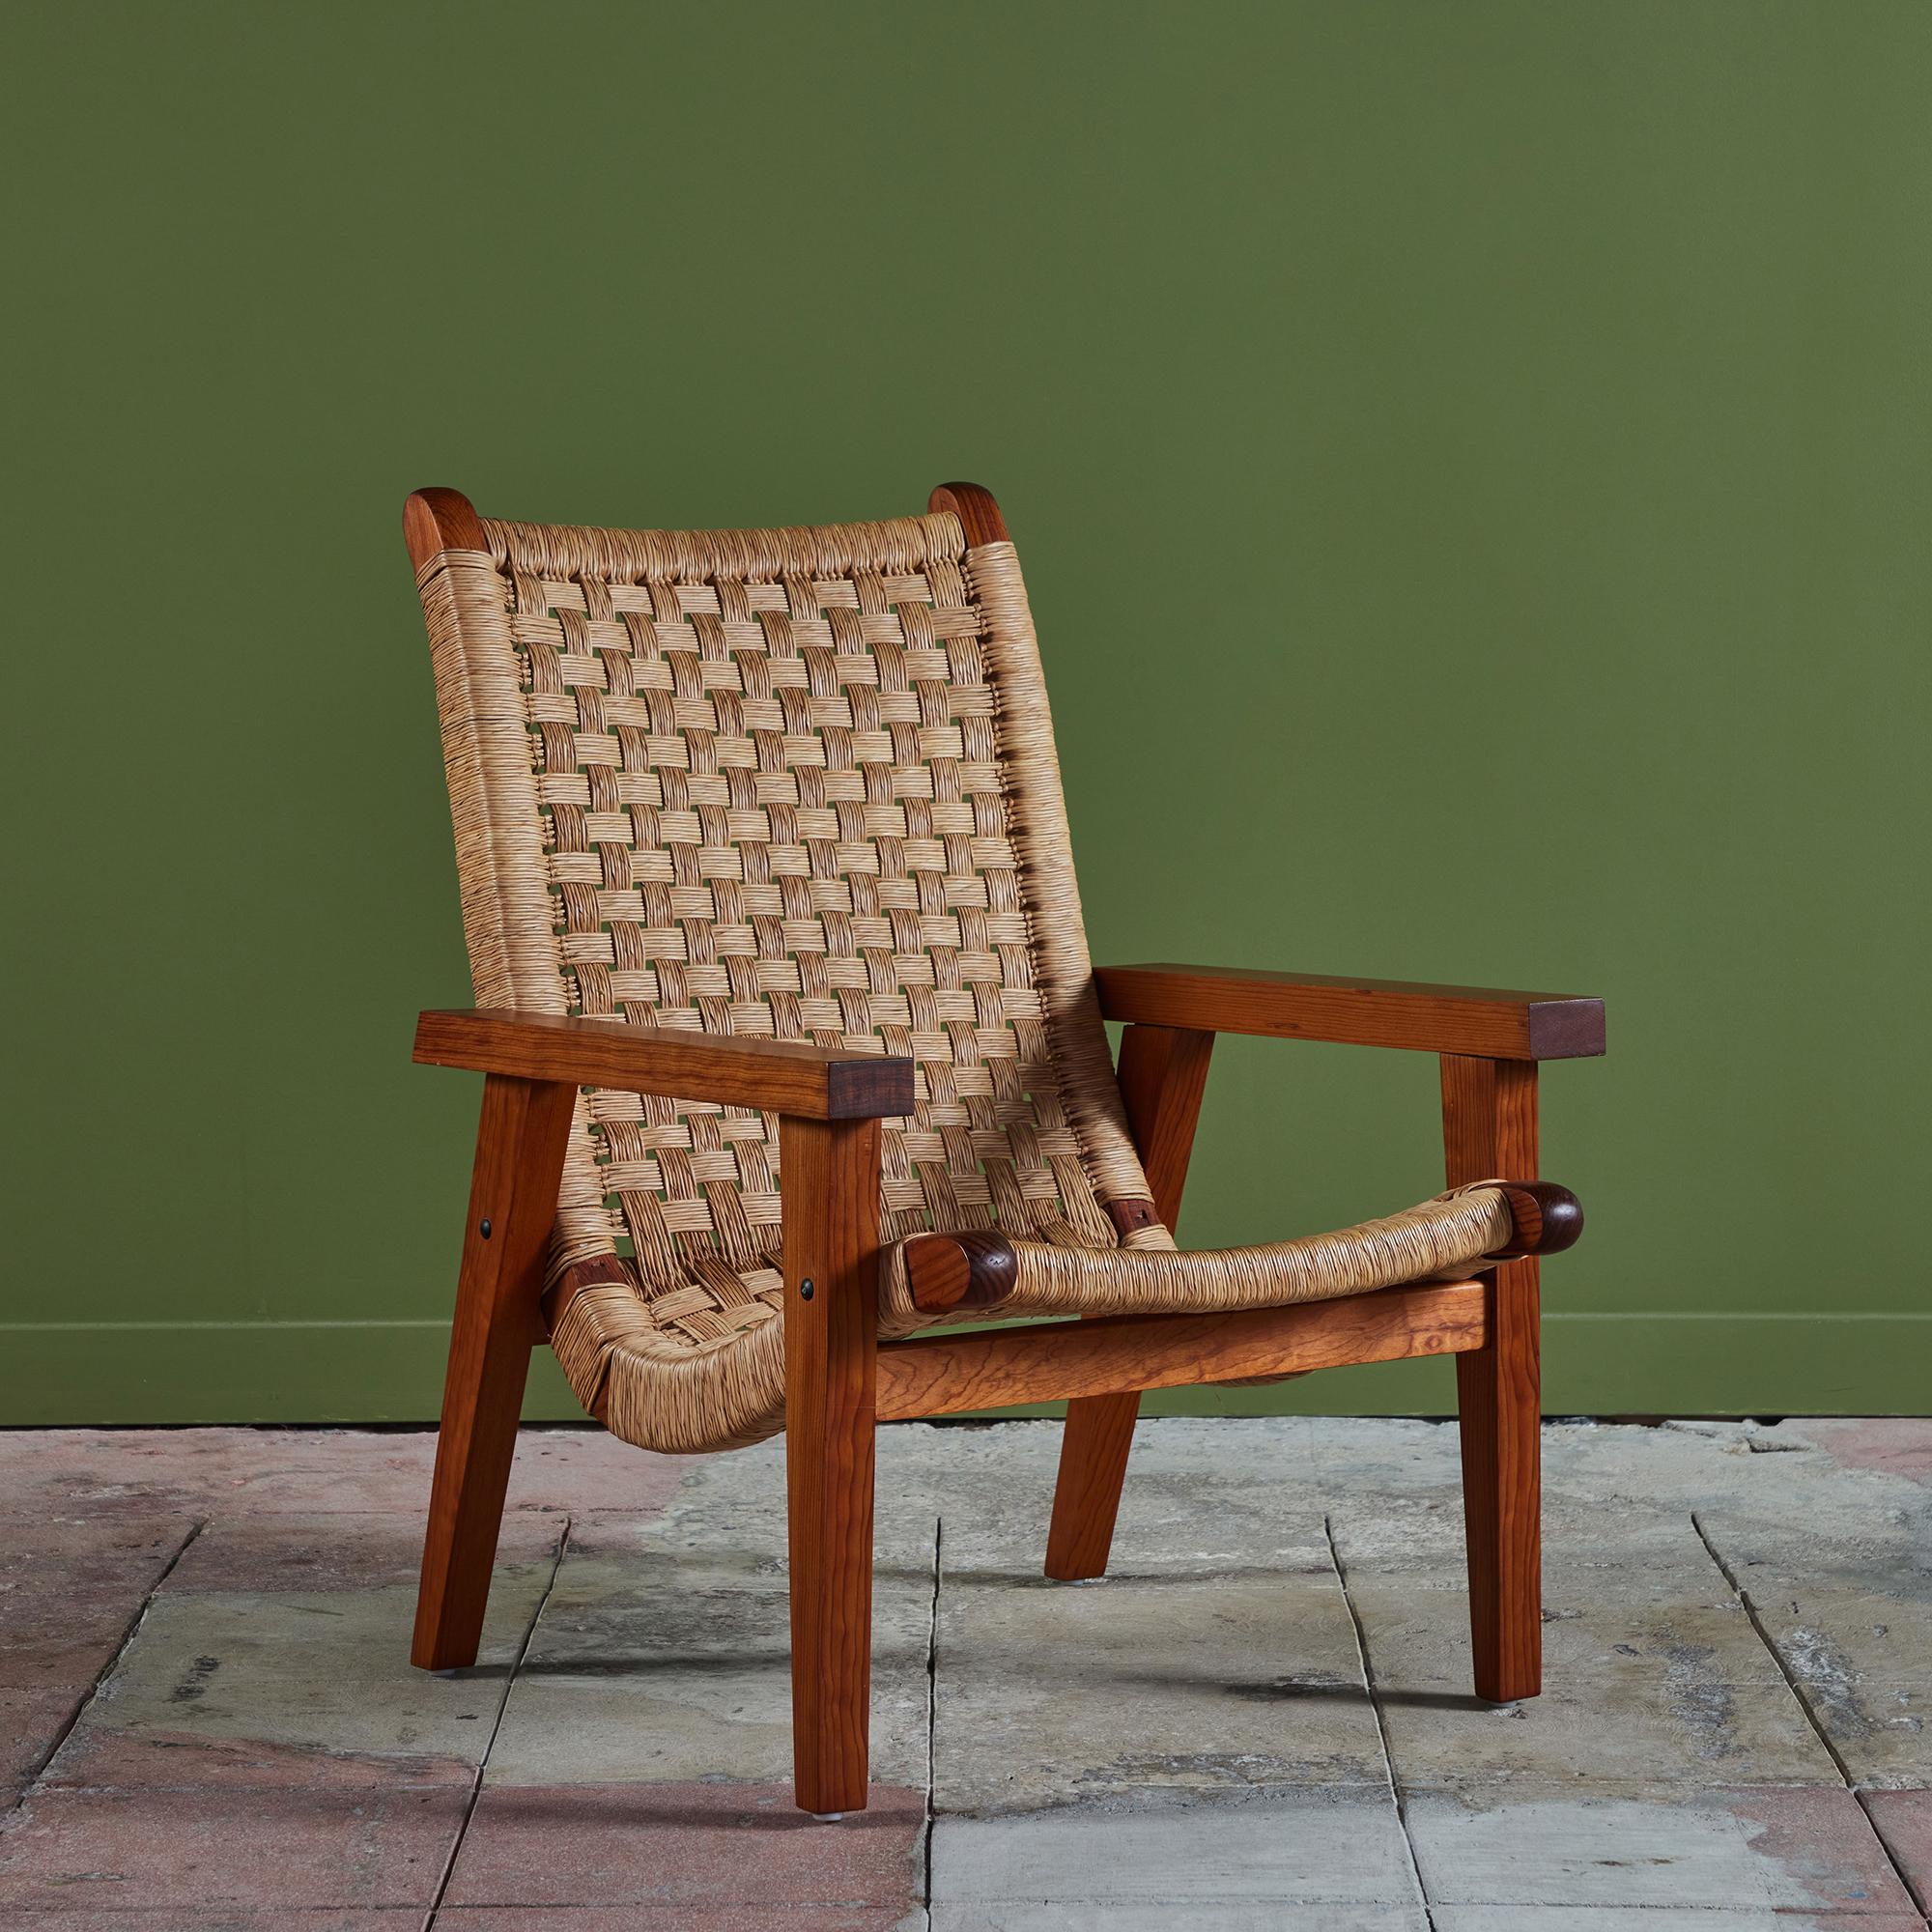 Bauhaus trained, Mexico City based designer Michael Van Beuren created highly functional modern pieces inspired by Mexican vernacular styles and materials. This lounge chair features a mahogany frame and a woven palm corded seat and